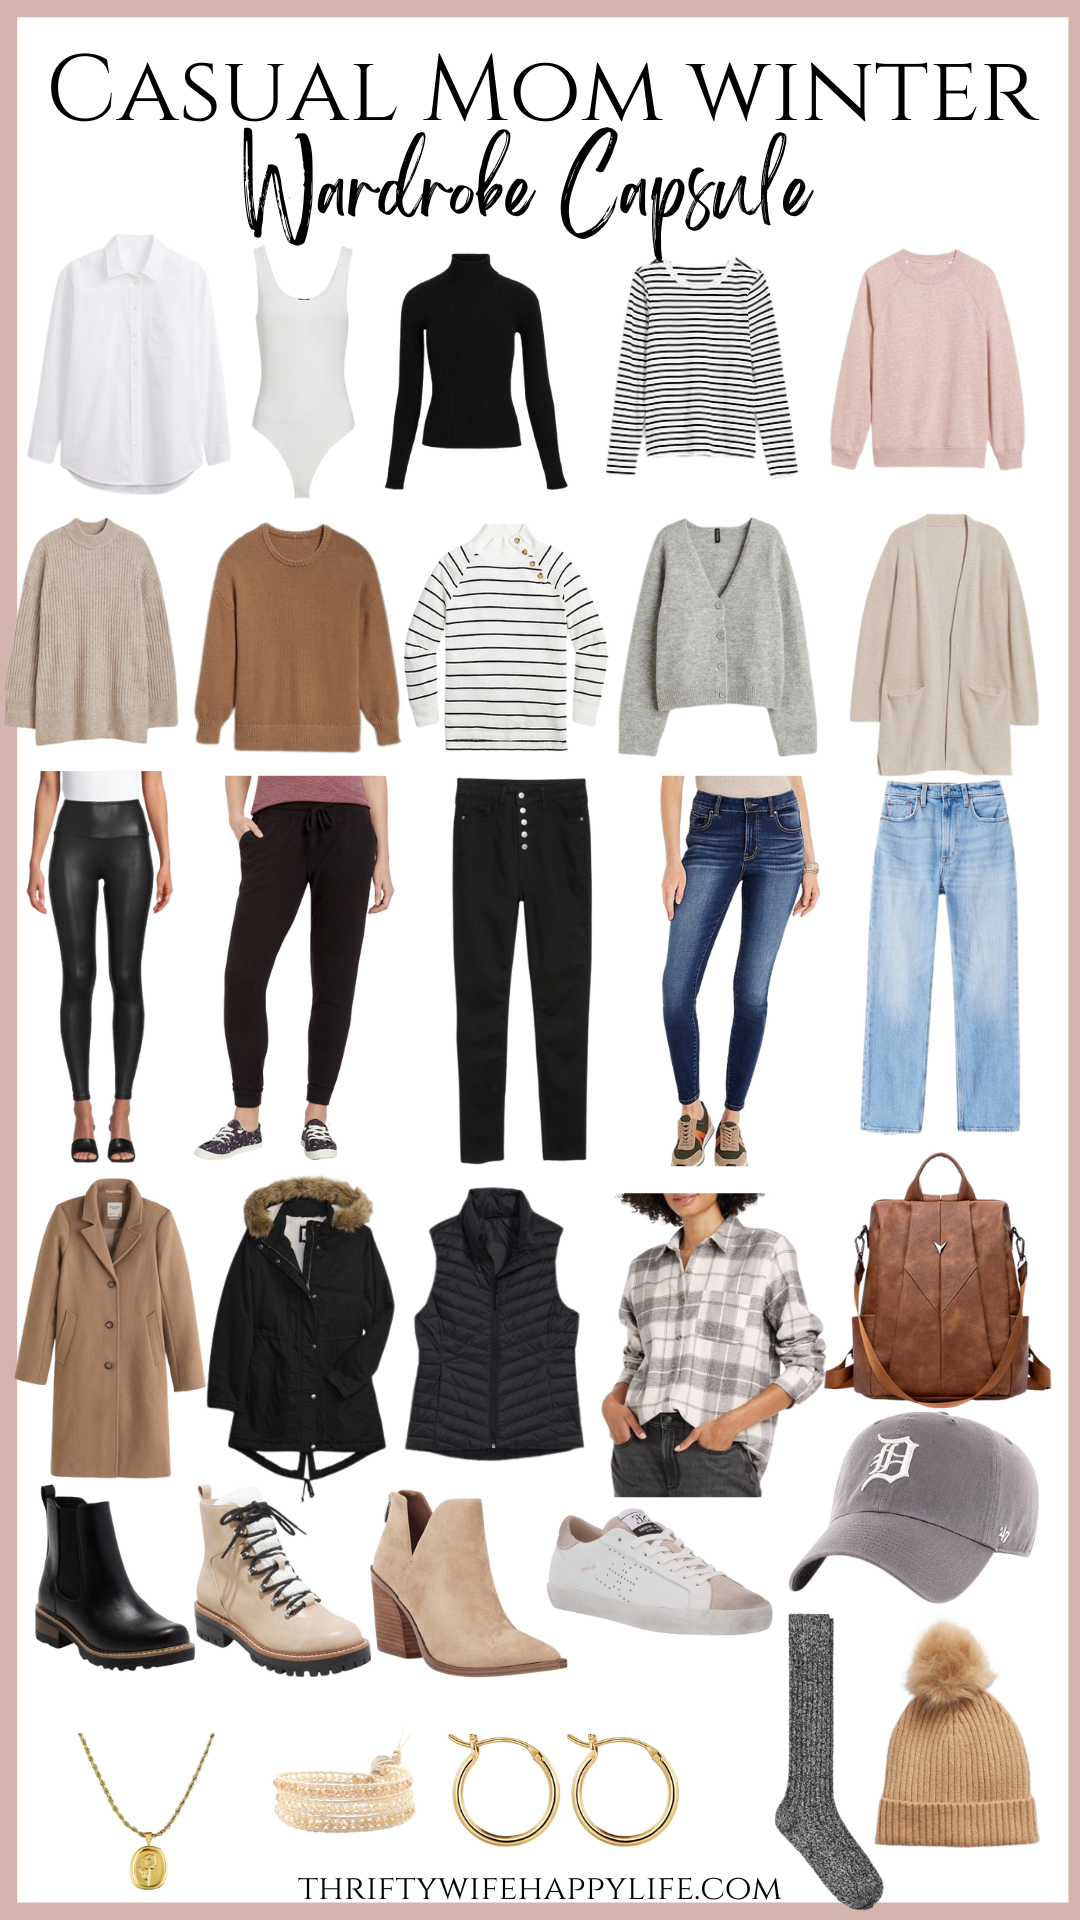 20 Winter Outfits Classy for Women  Winter fashion outfits casual, Stylish  winter outfits, Classy winter outfits